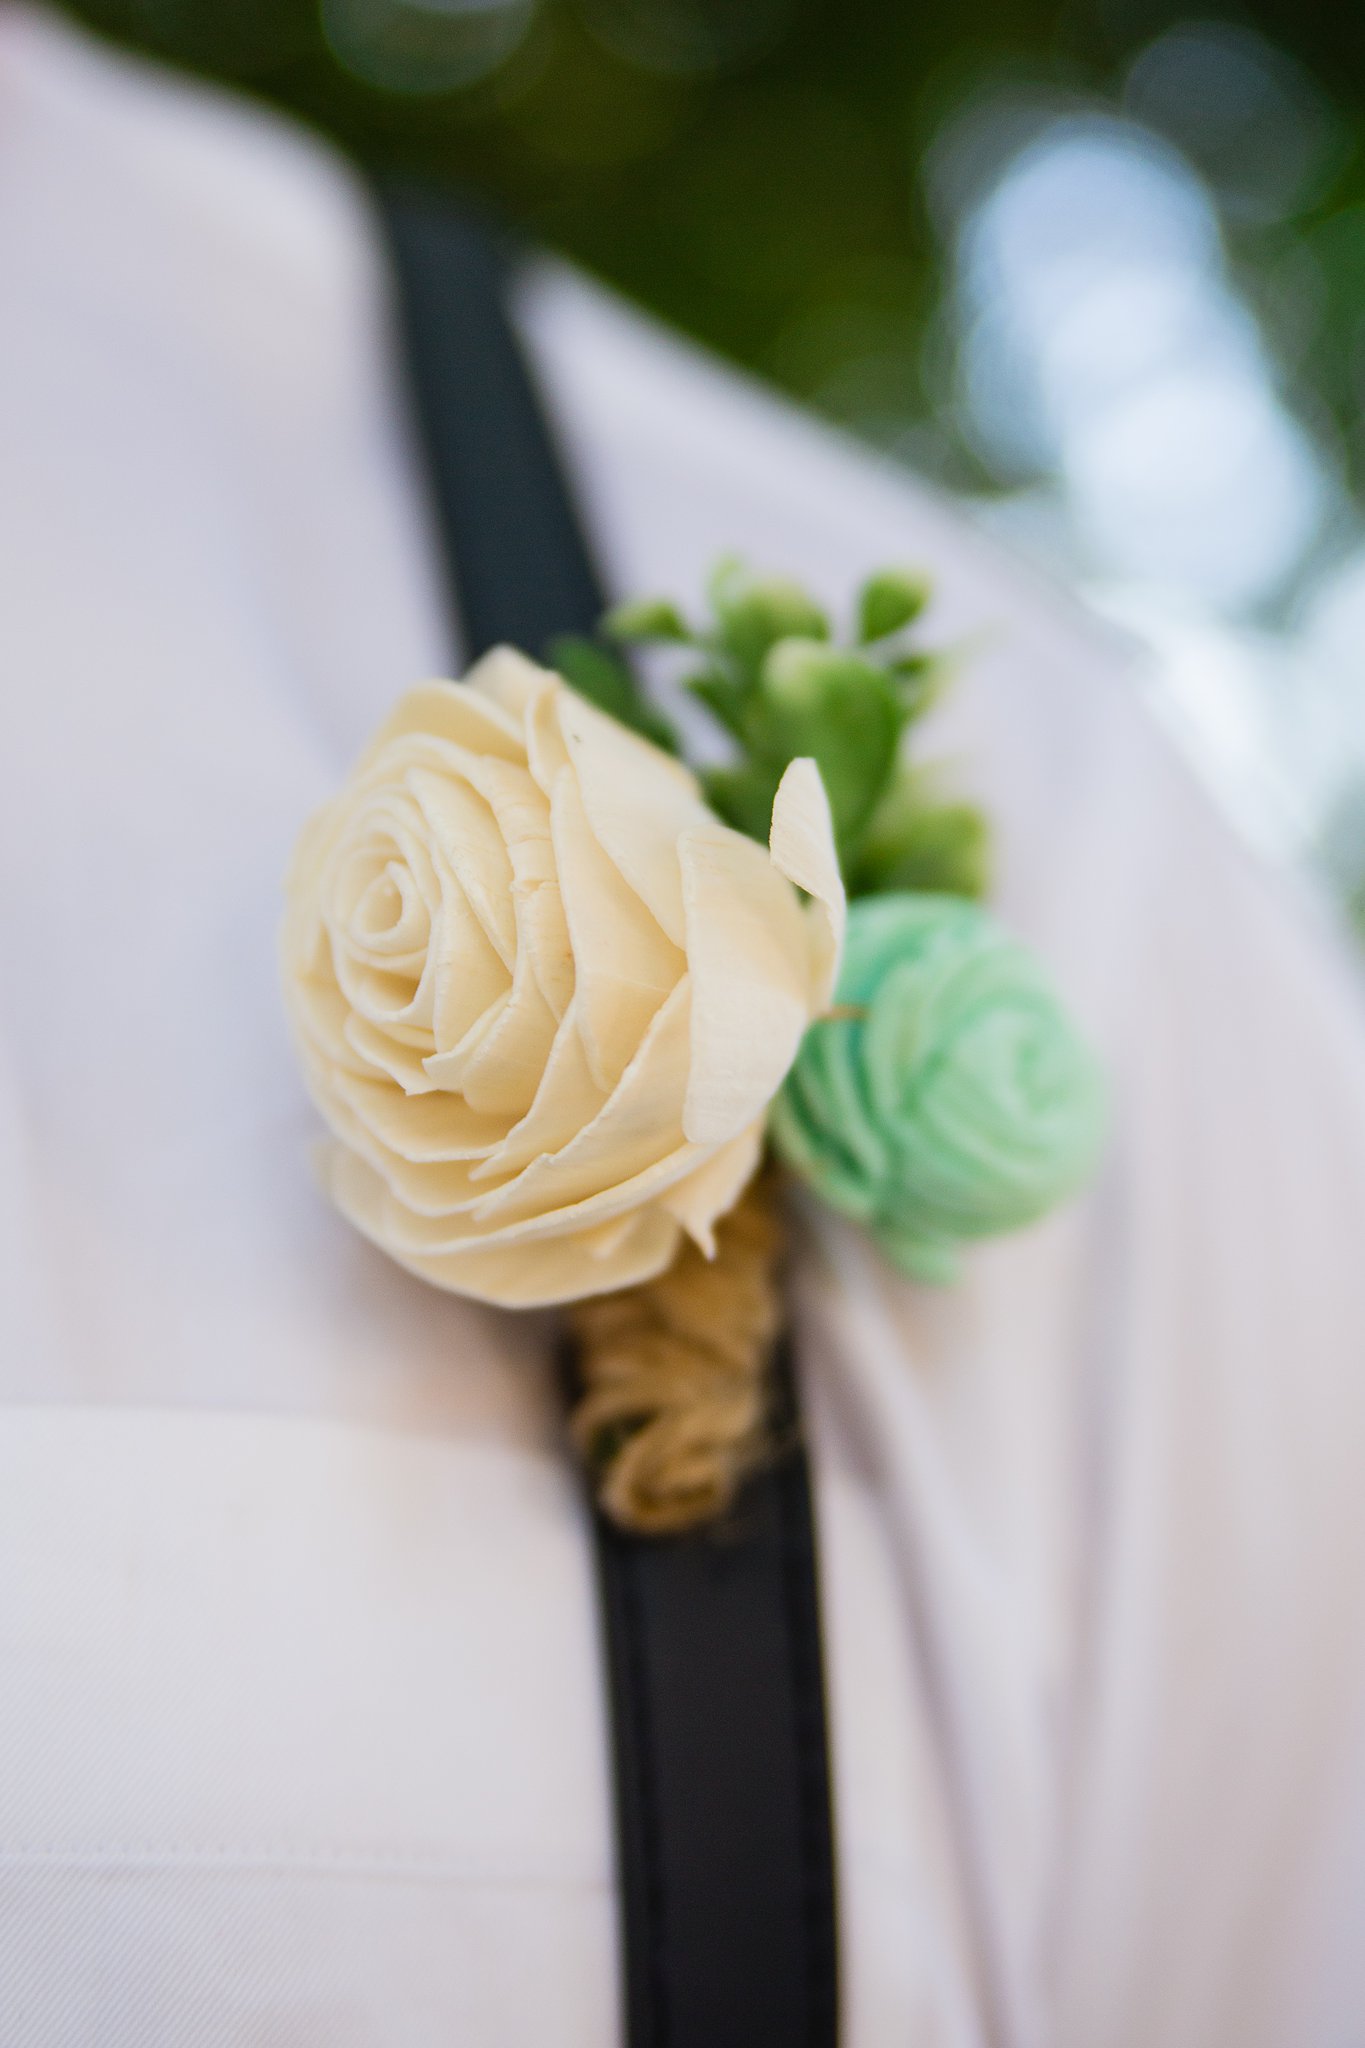 Groom's wooden flower boutonniere by PMA Photography.